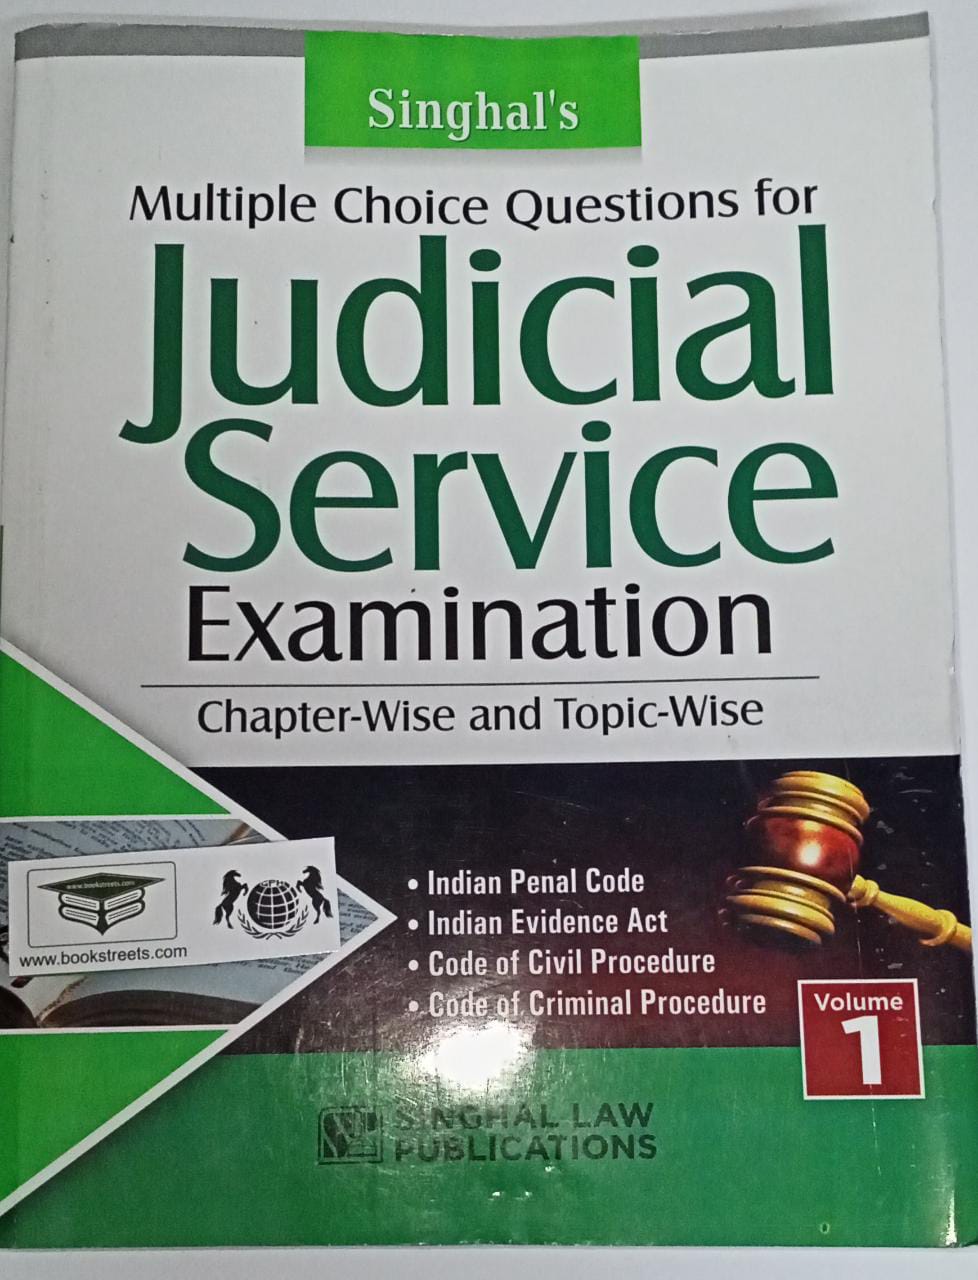 Singhal's Multiple Choice Question for Judicial Service Examination Chapter-wise and Topic wise Volume-1 by Singhal Law Publications